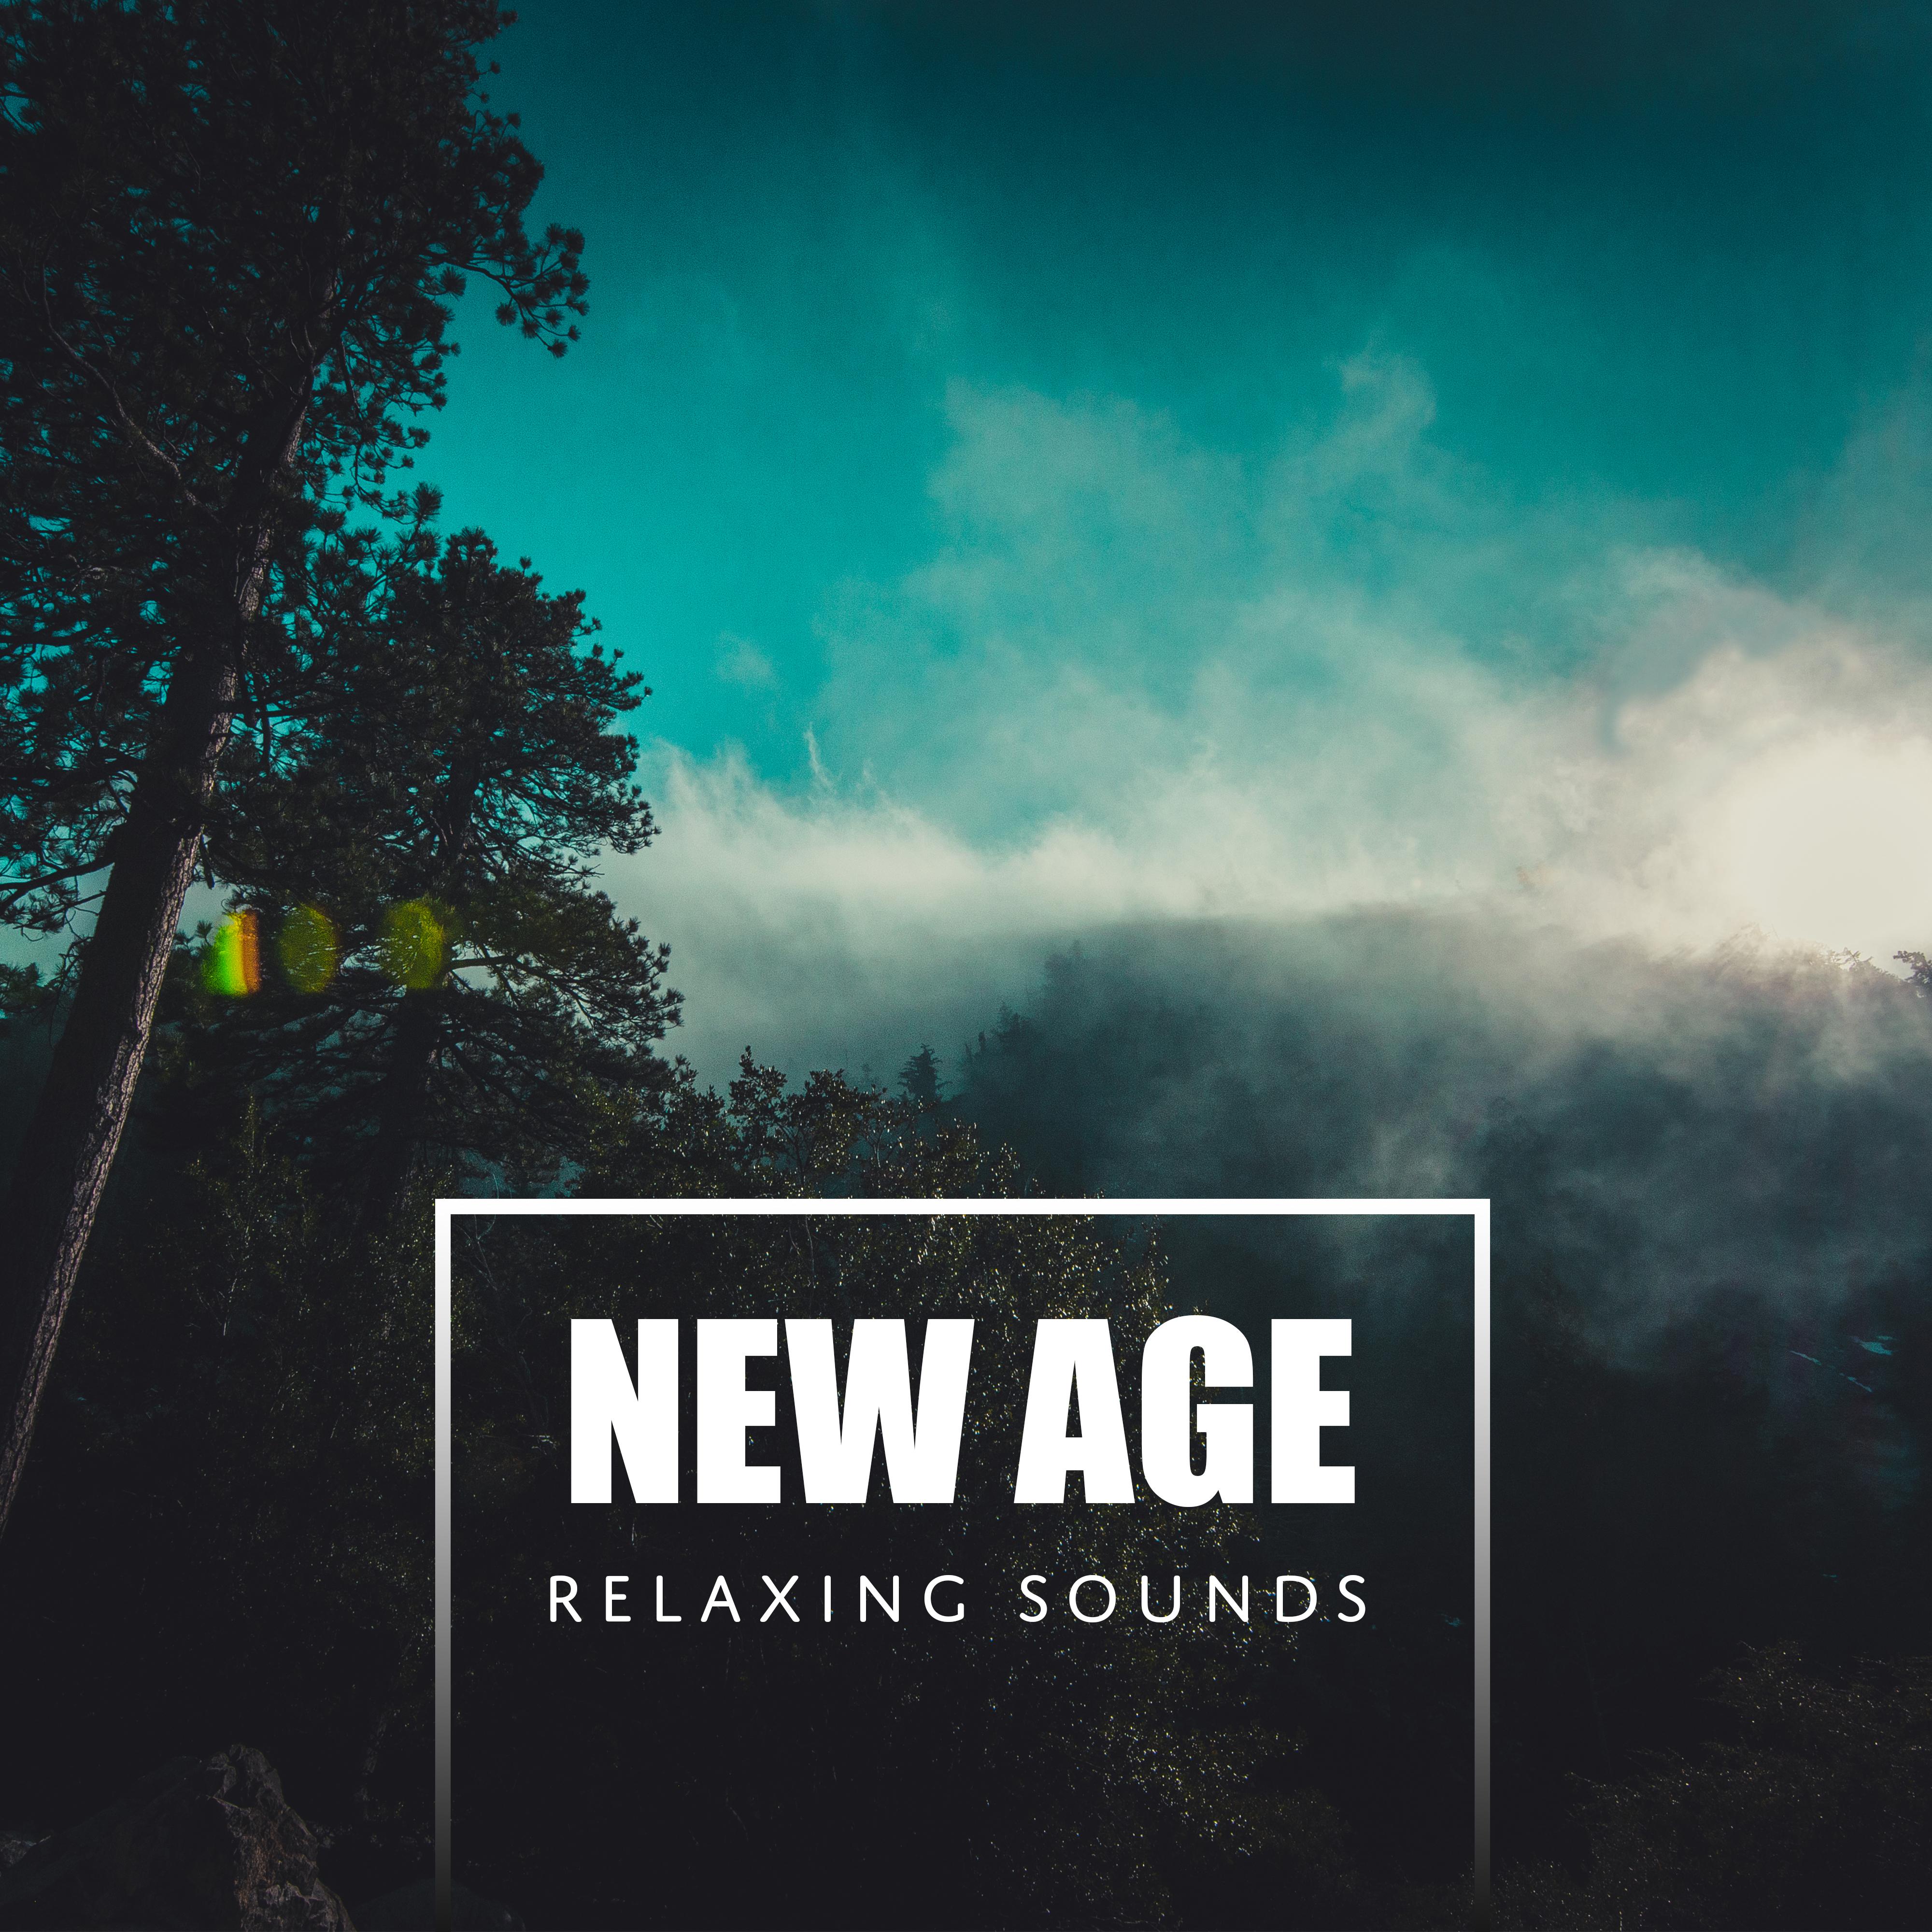 New Age Relaxing Sounds